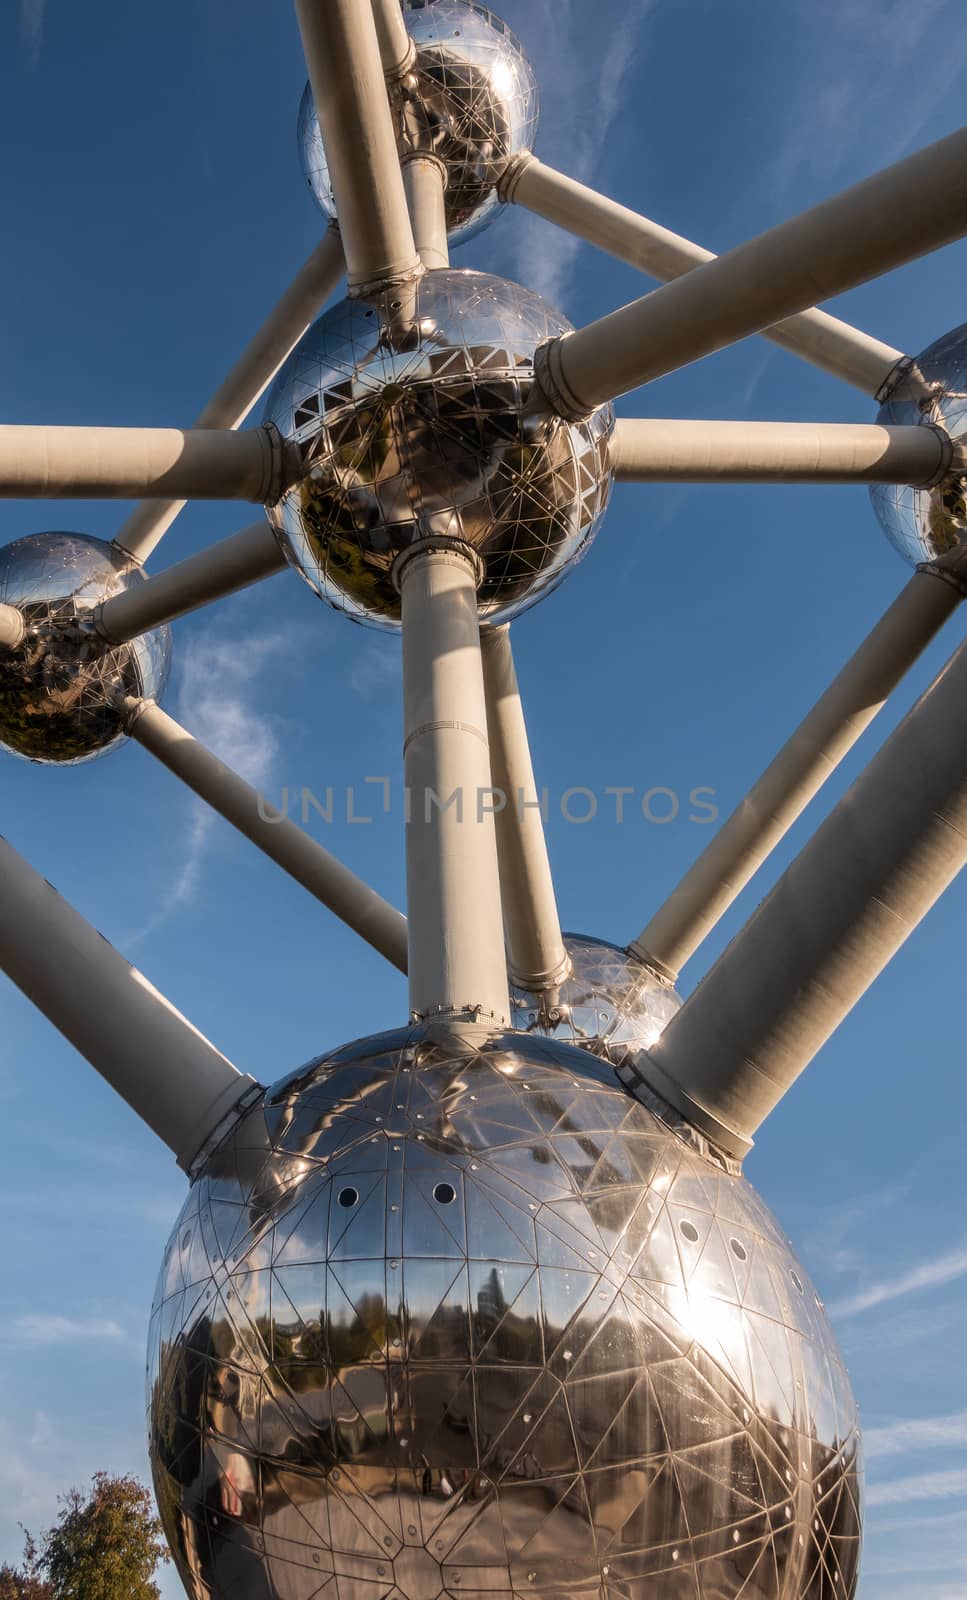 Six spheres of The Atomium in Brussels, Belgium. by Claudine